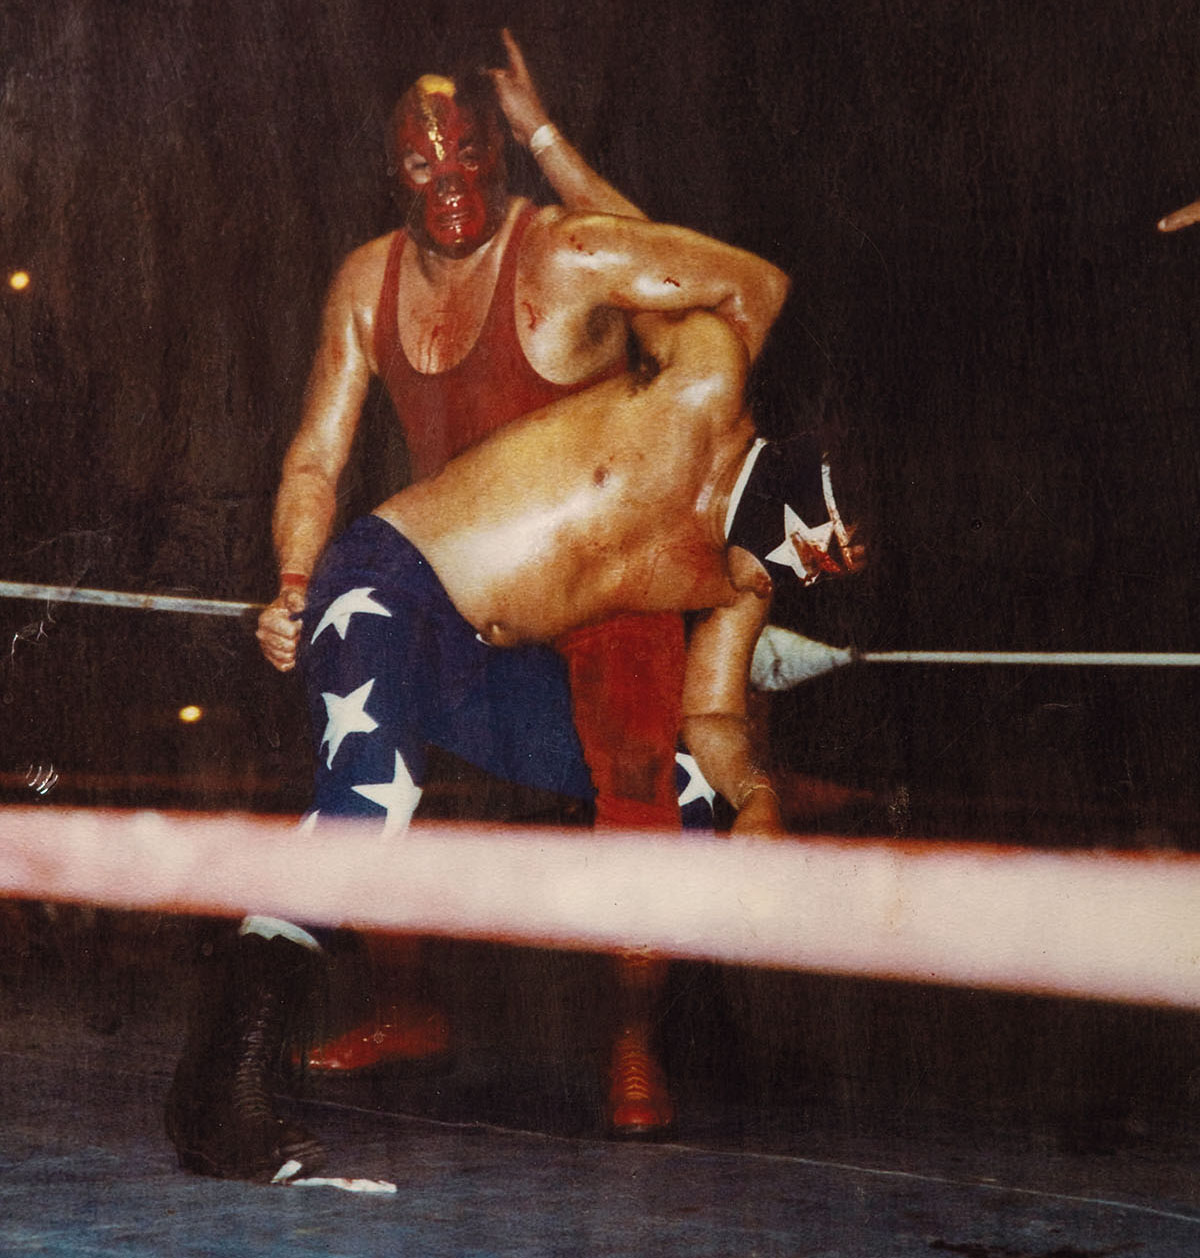 A man in red and a man in striped pants fight in a boxing ring